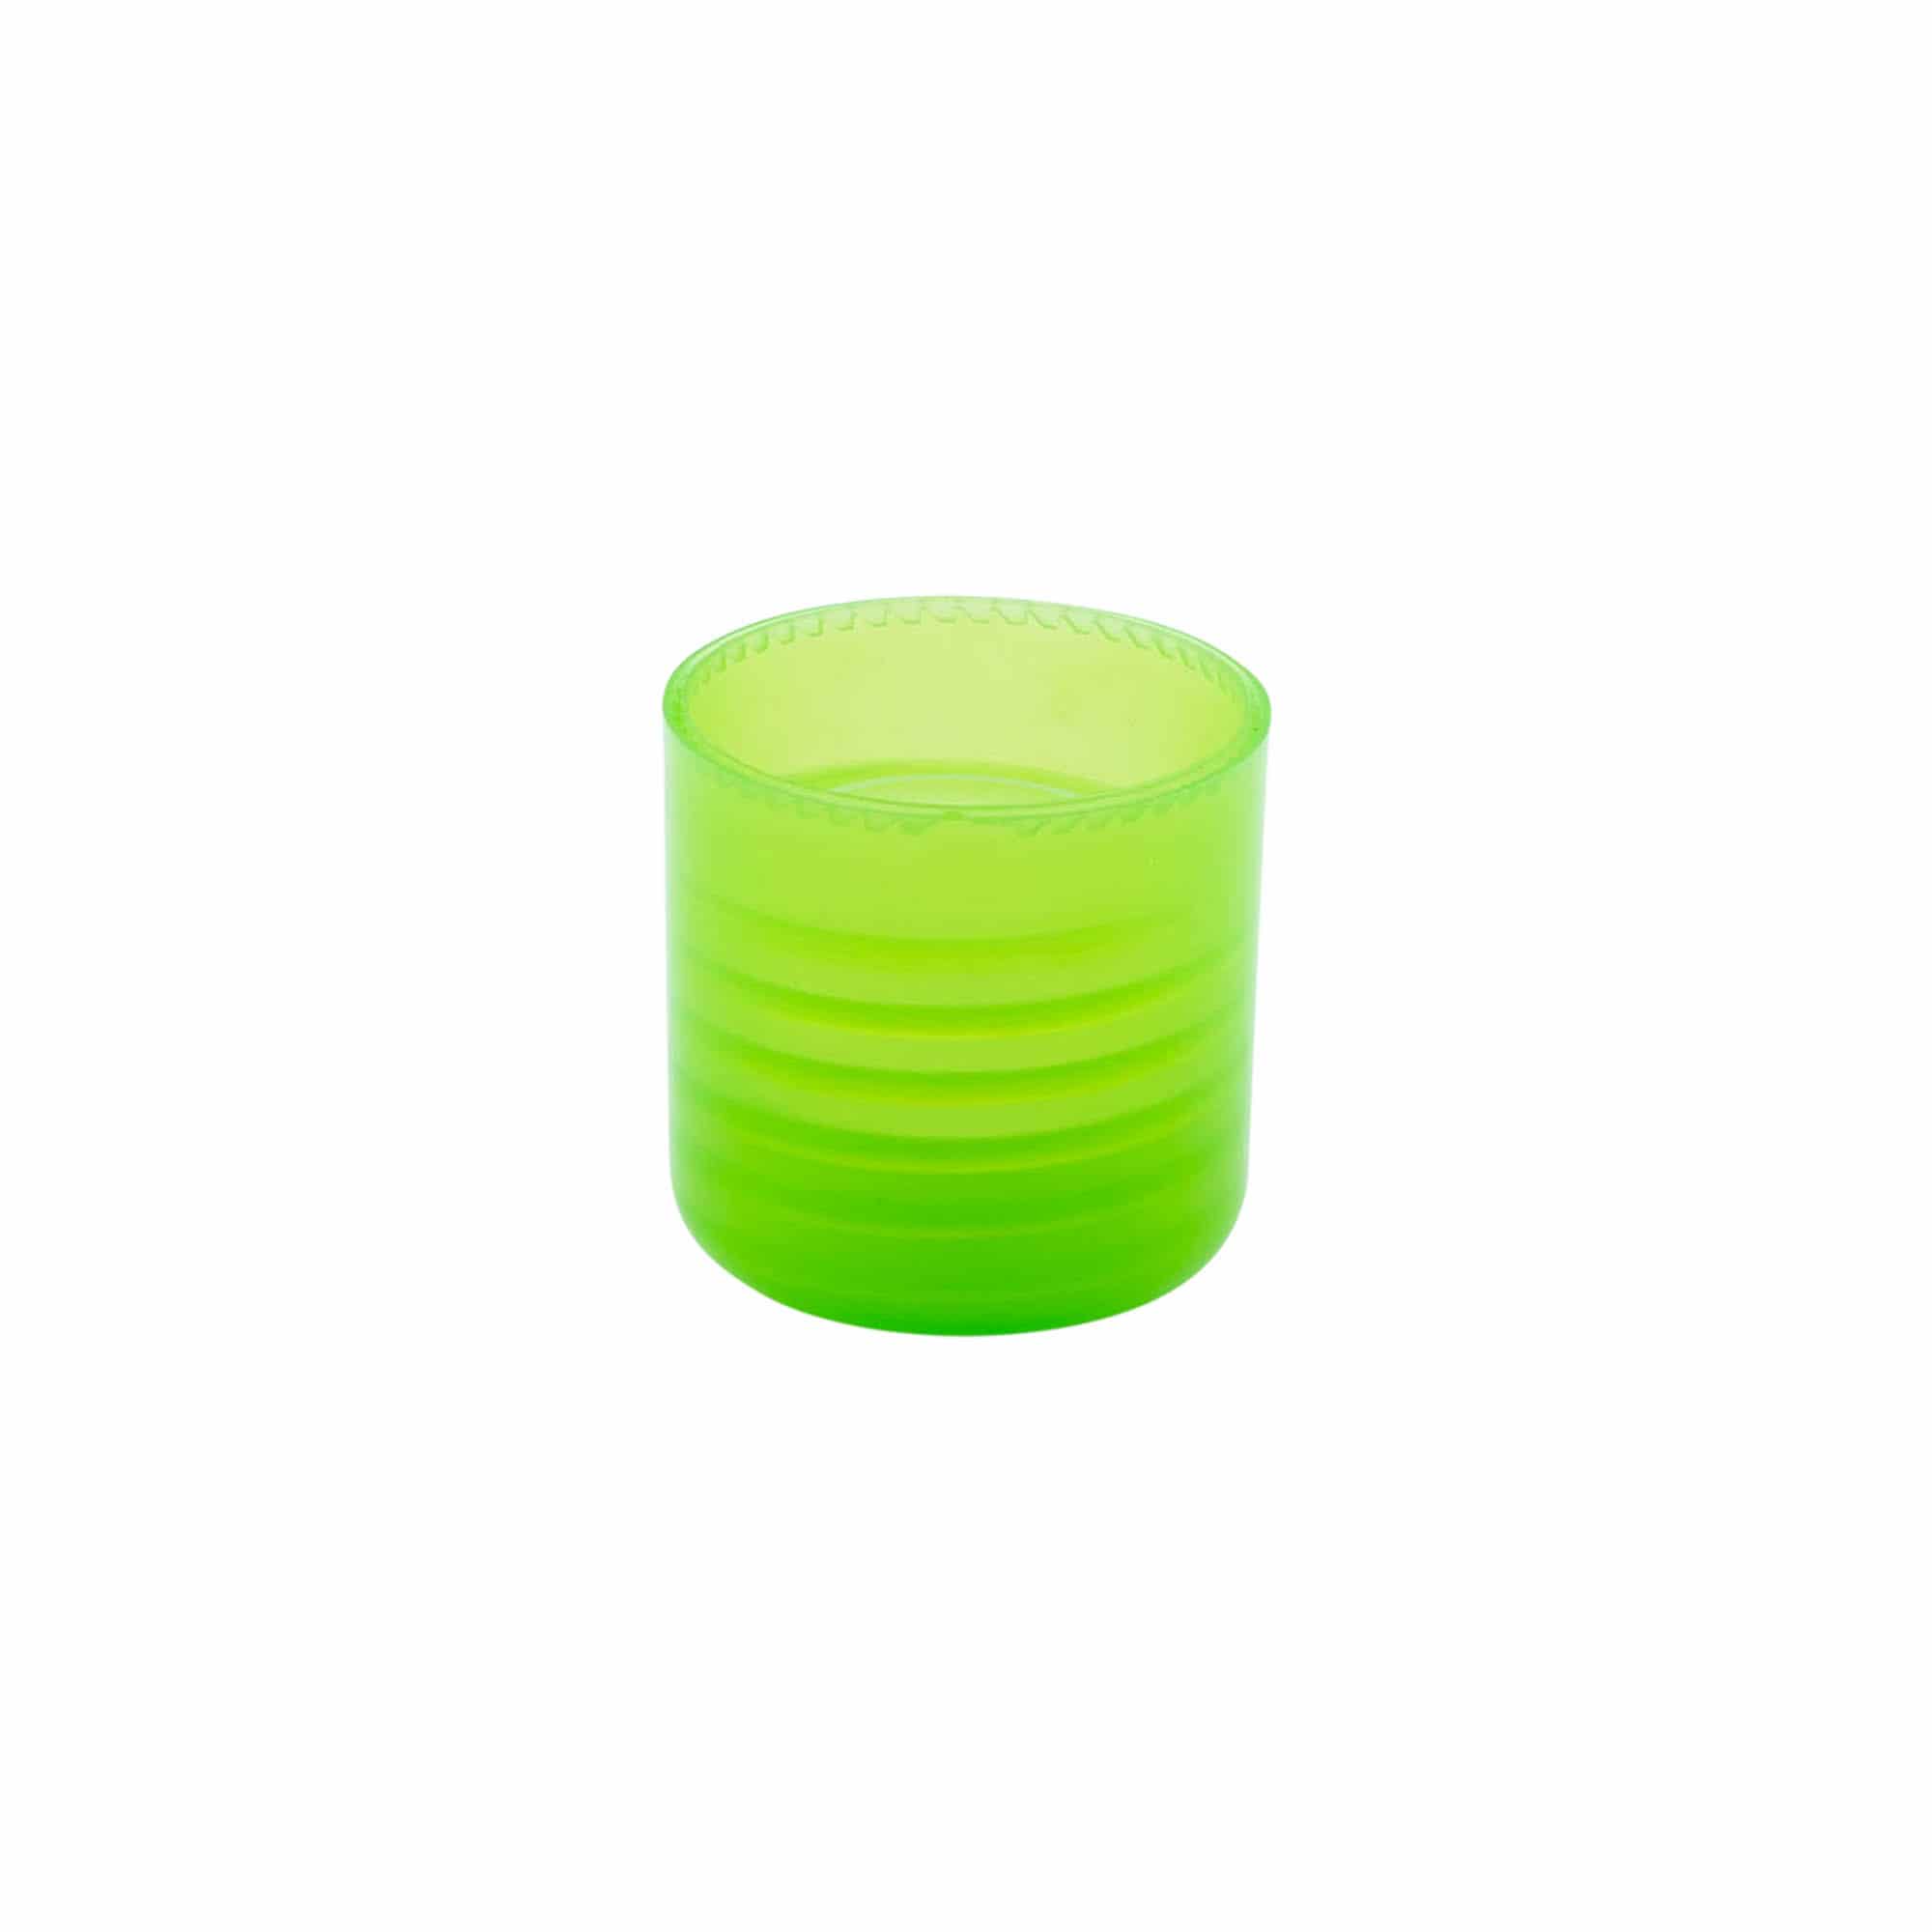 Screw cap with spray insert, PP plastic, green, for opening: GPI 24/410